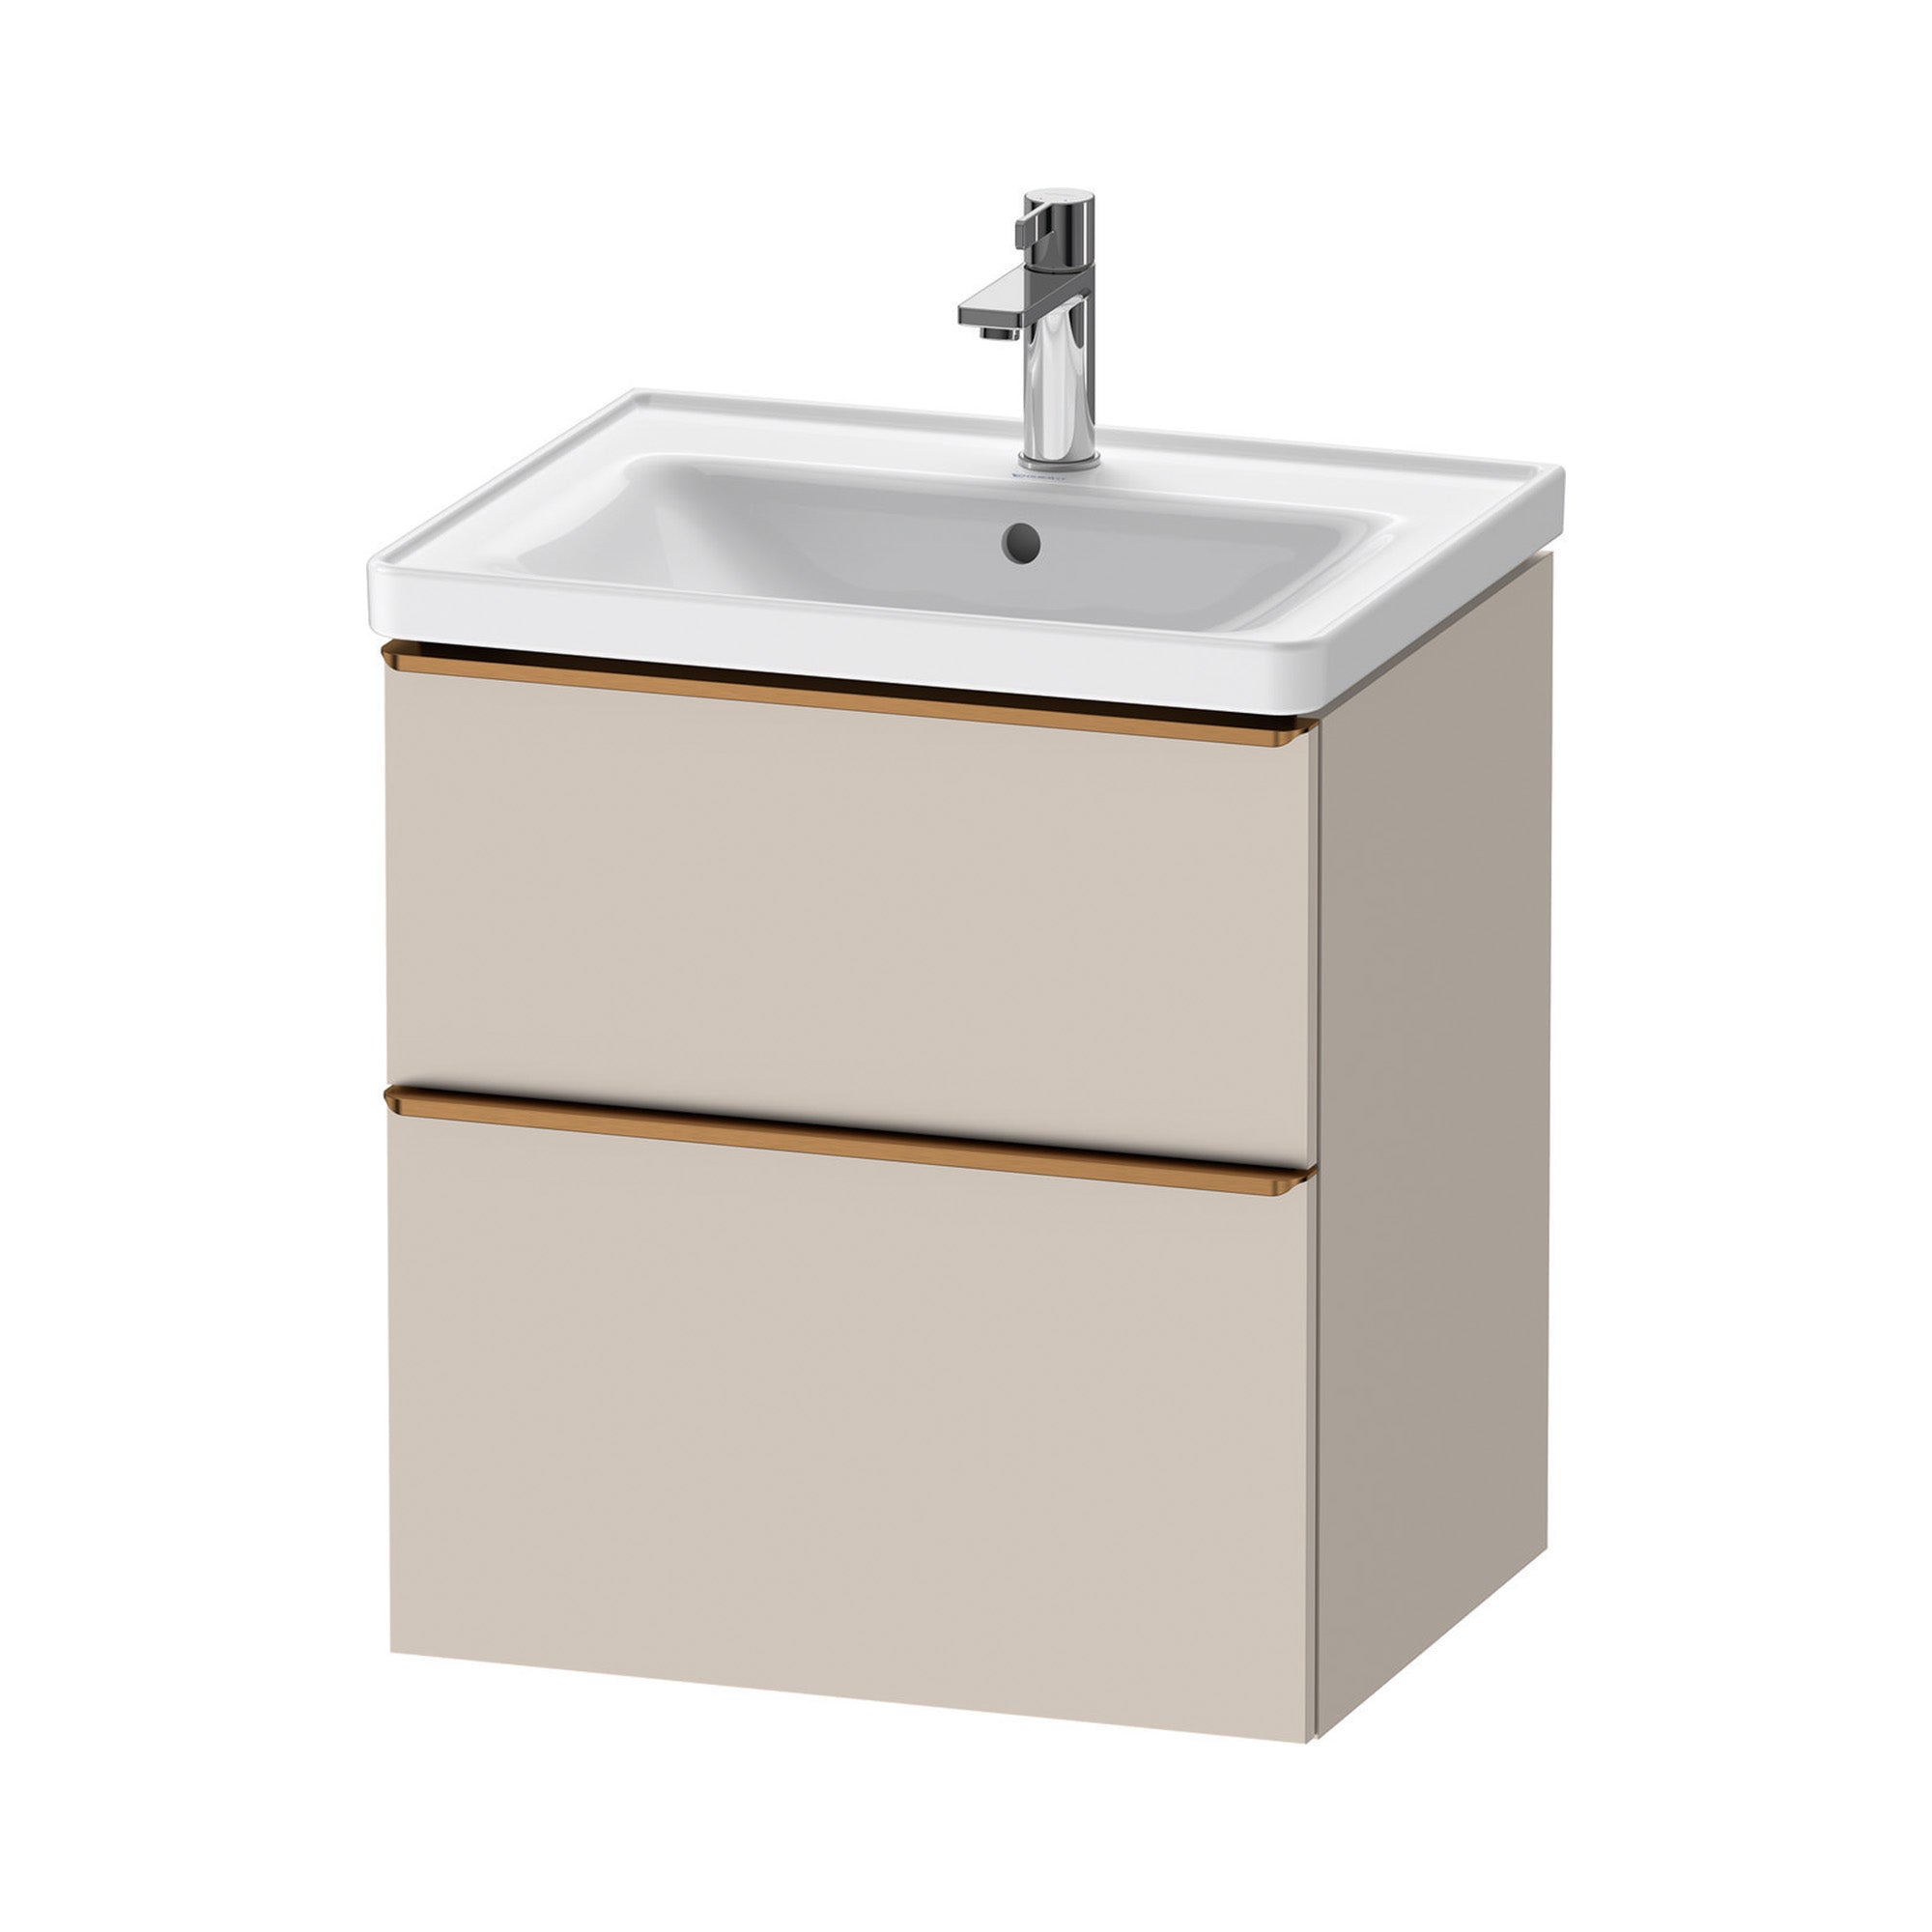 duravit d-neo 600 wall mounted vanity unit with d-neo basin taupe brushed bronze handles